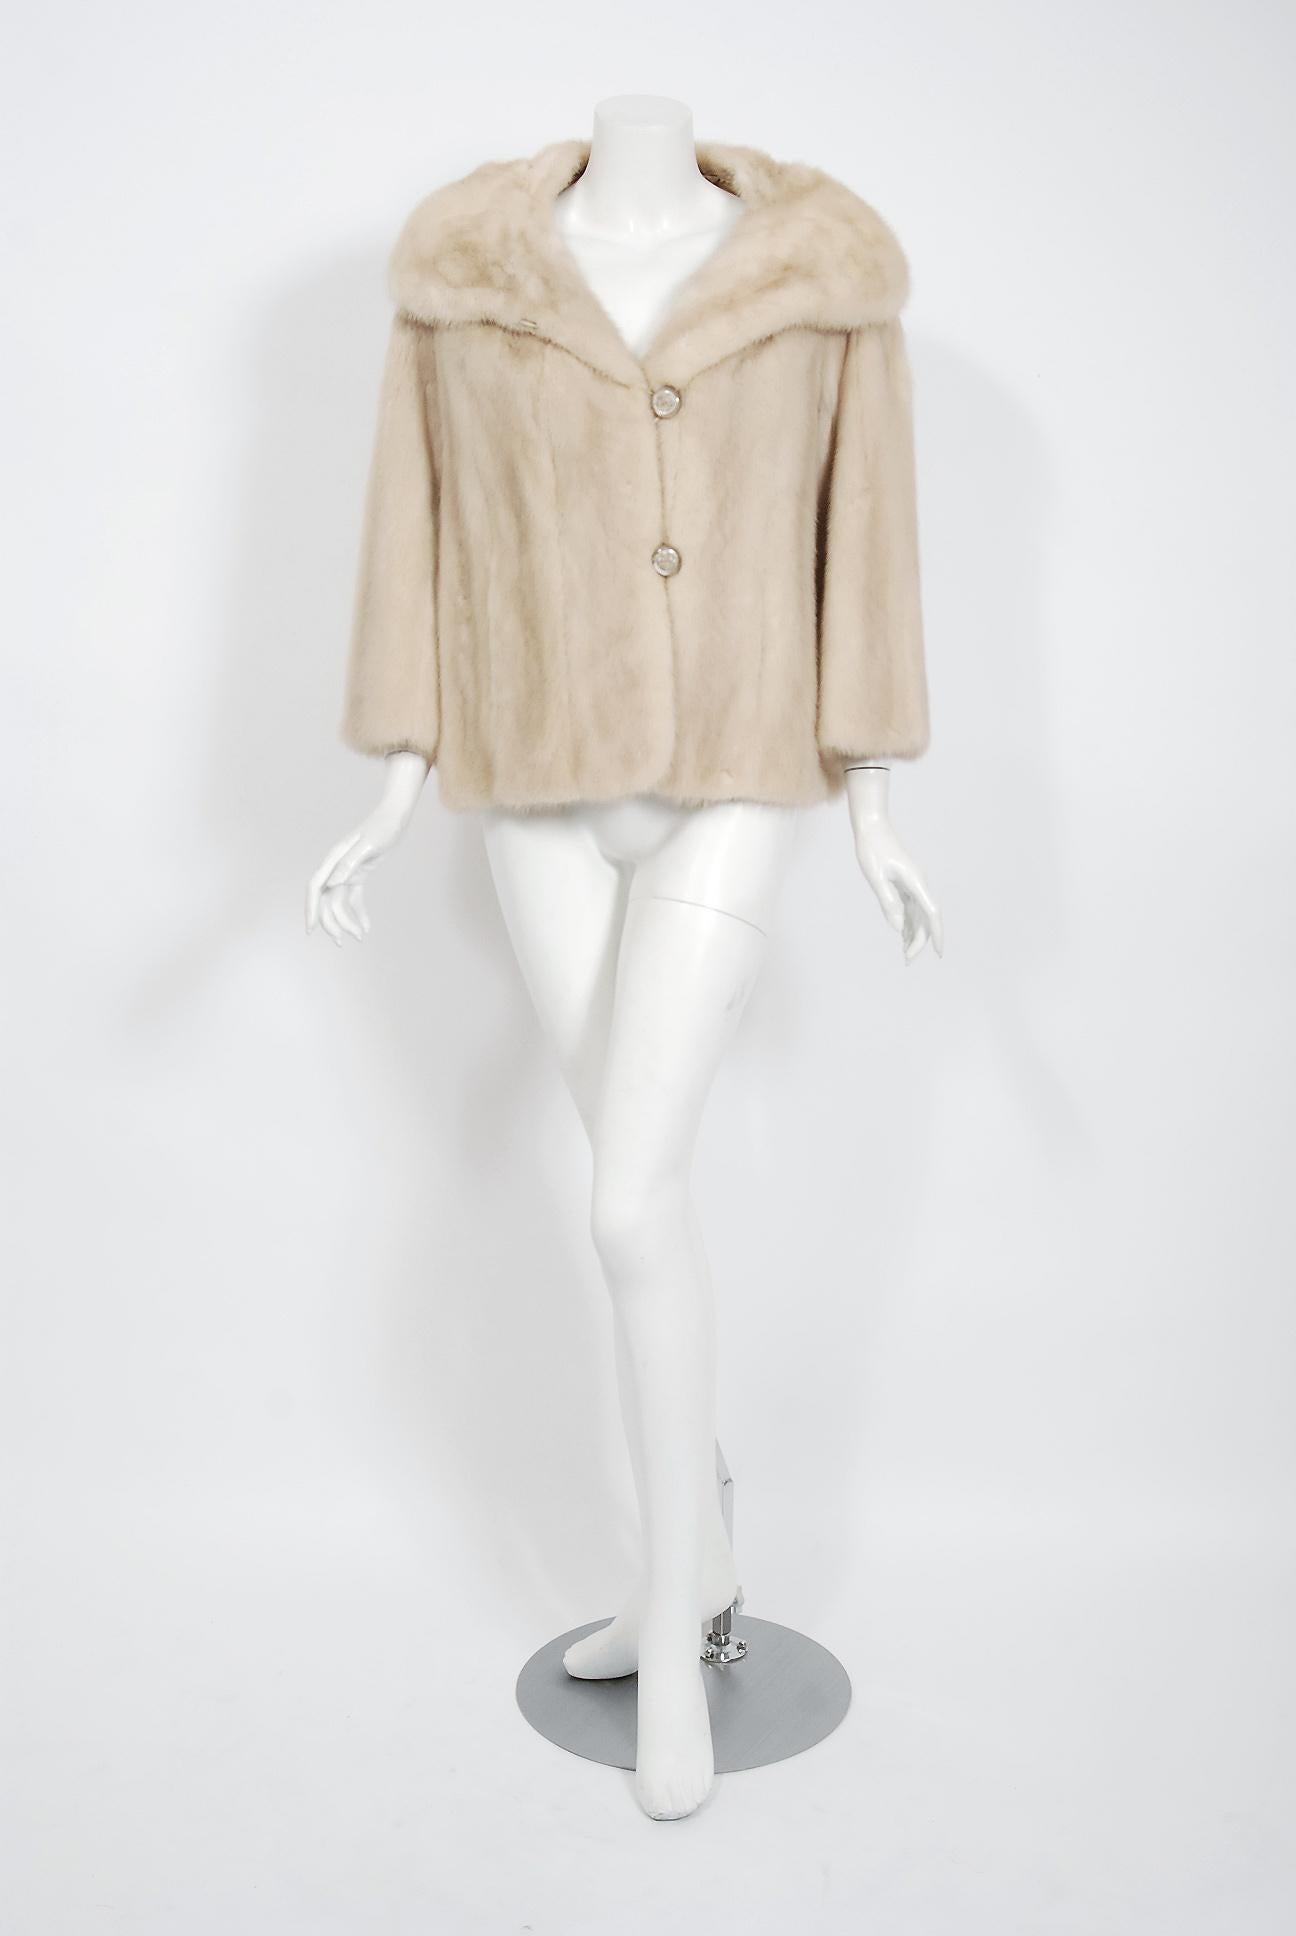 An extraordinary 1960's Adrian Thal Couture creme-beige mink fur jacket that will make any woman shine during the winter season! It is easy to see the level of quality in this rare piece; the fur is extremely supple and soft. The jacket is pieced